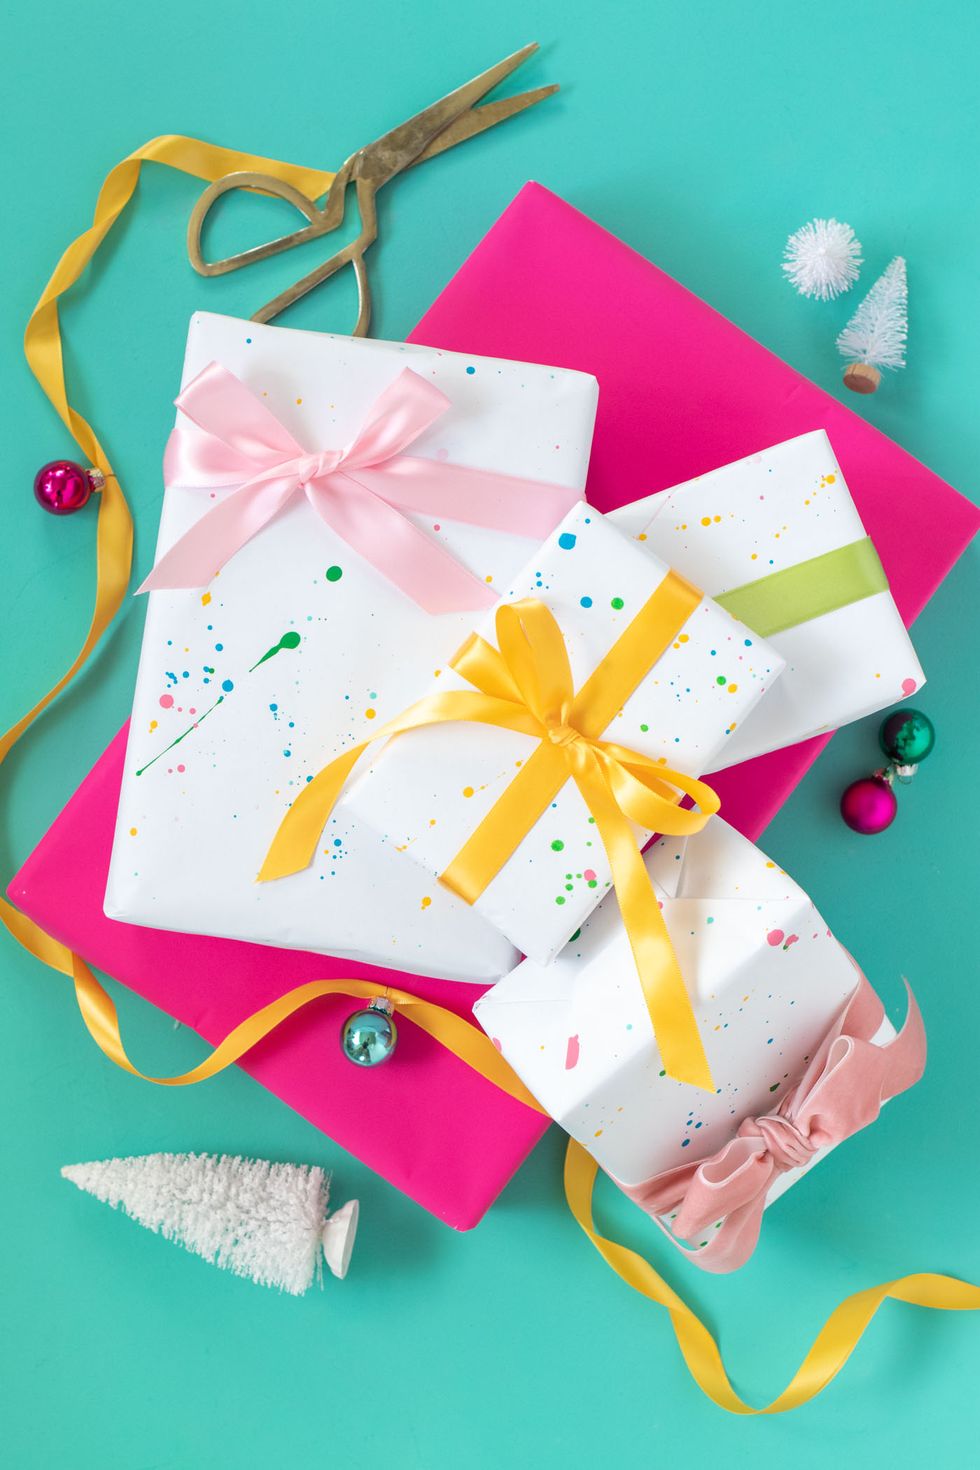 Recycling Projects for Kids: Making Gift Wrap